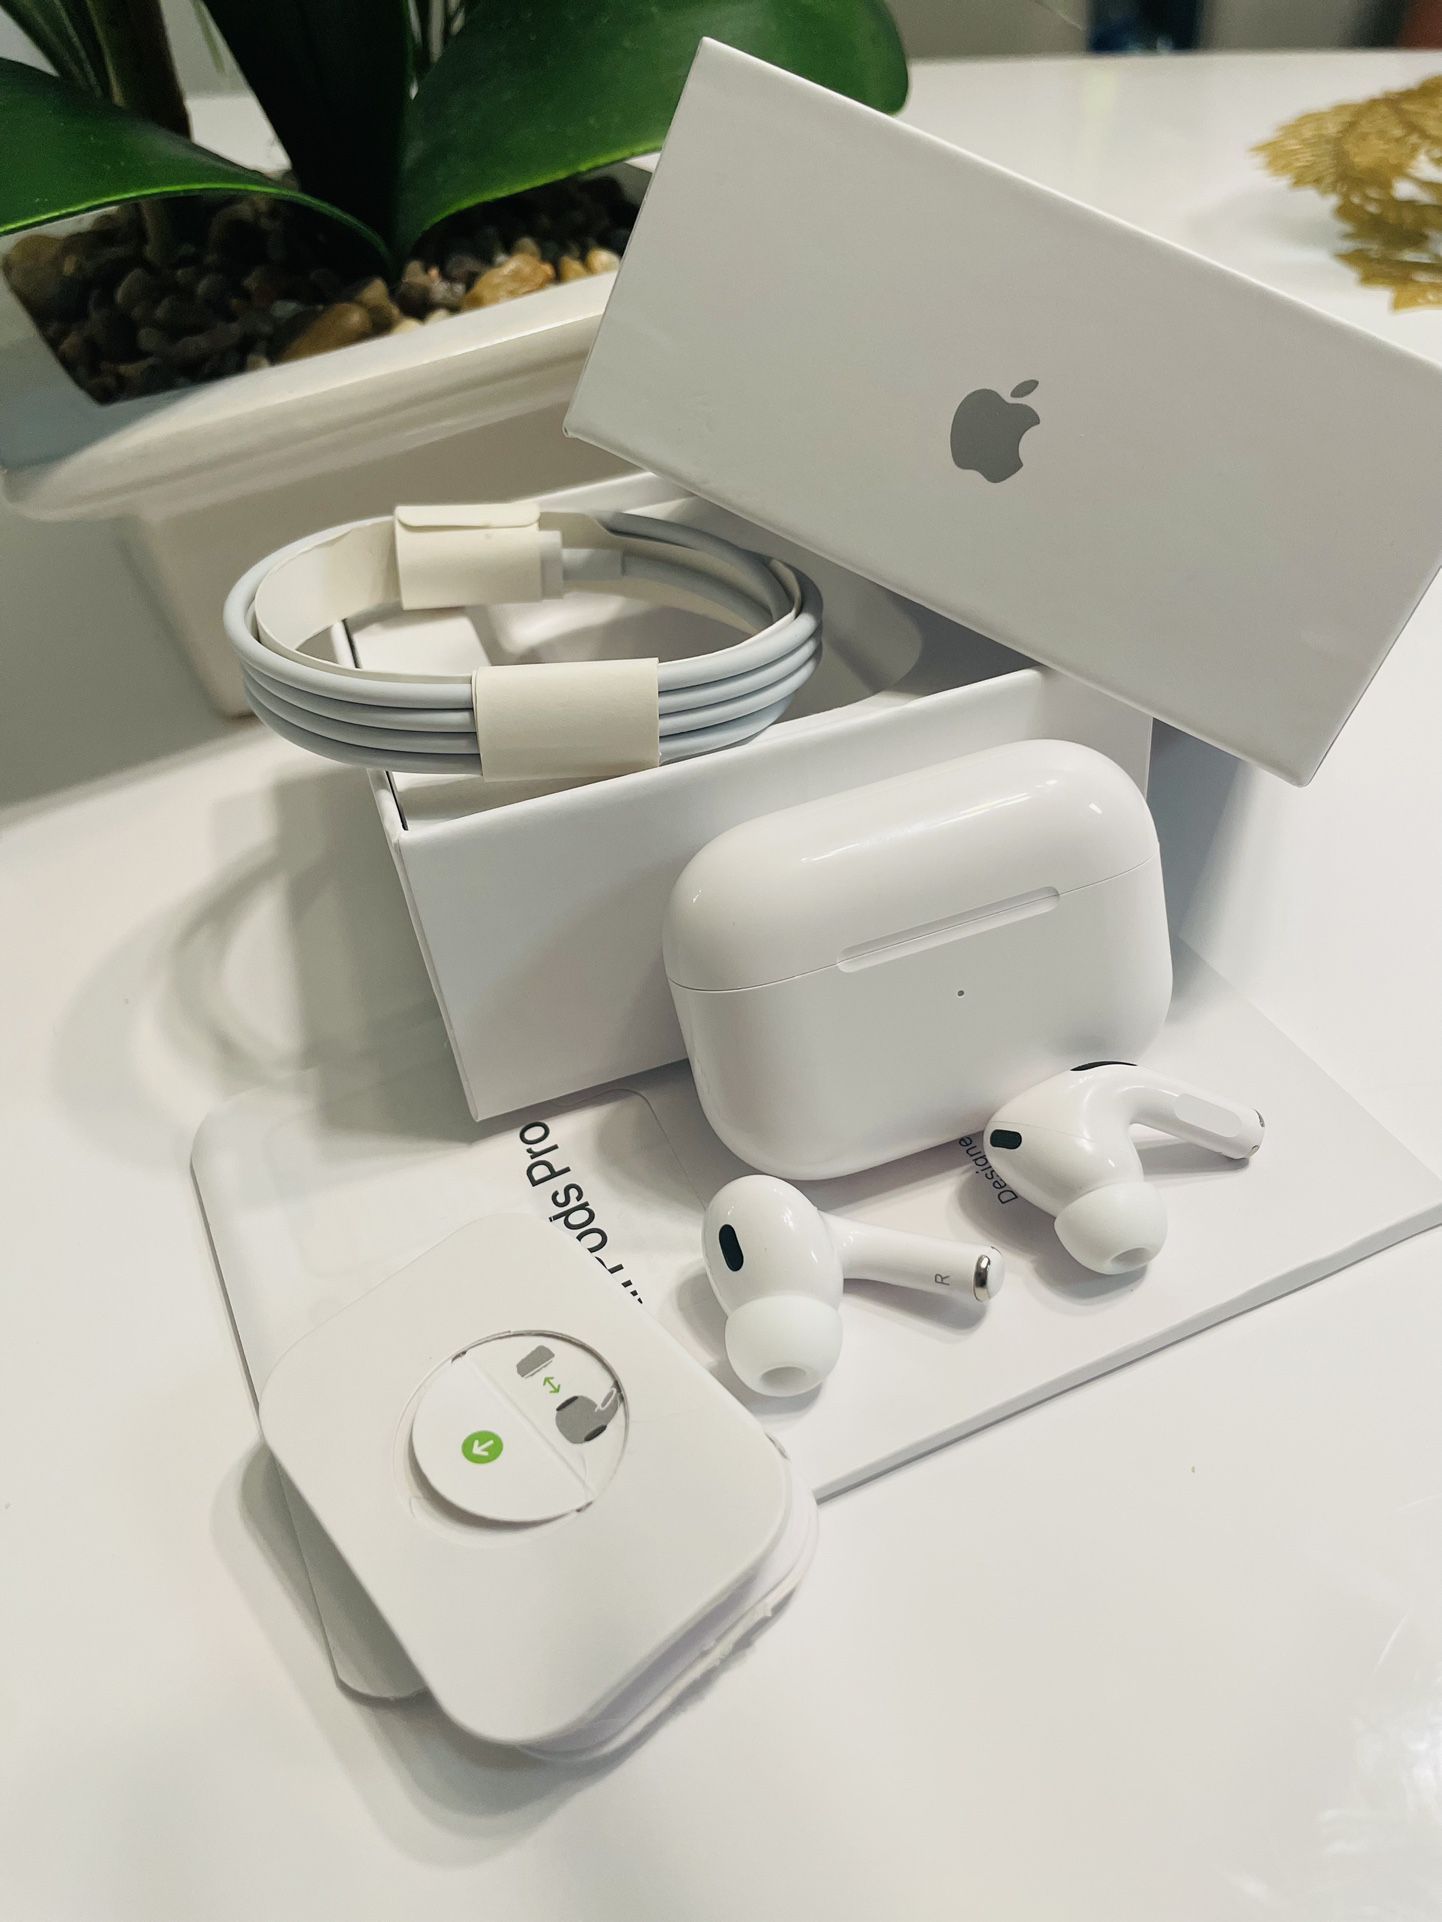 Airpod Pros 2nd generation